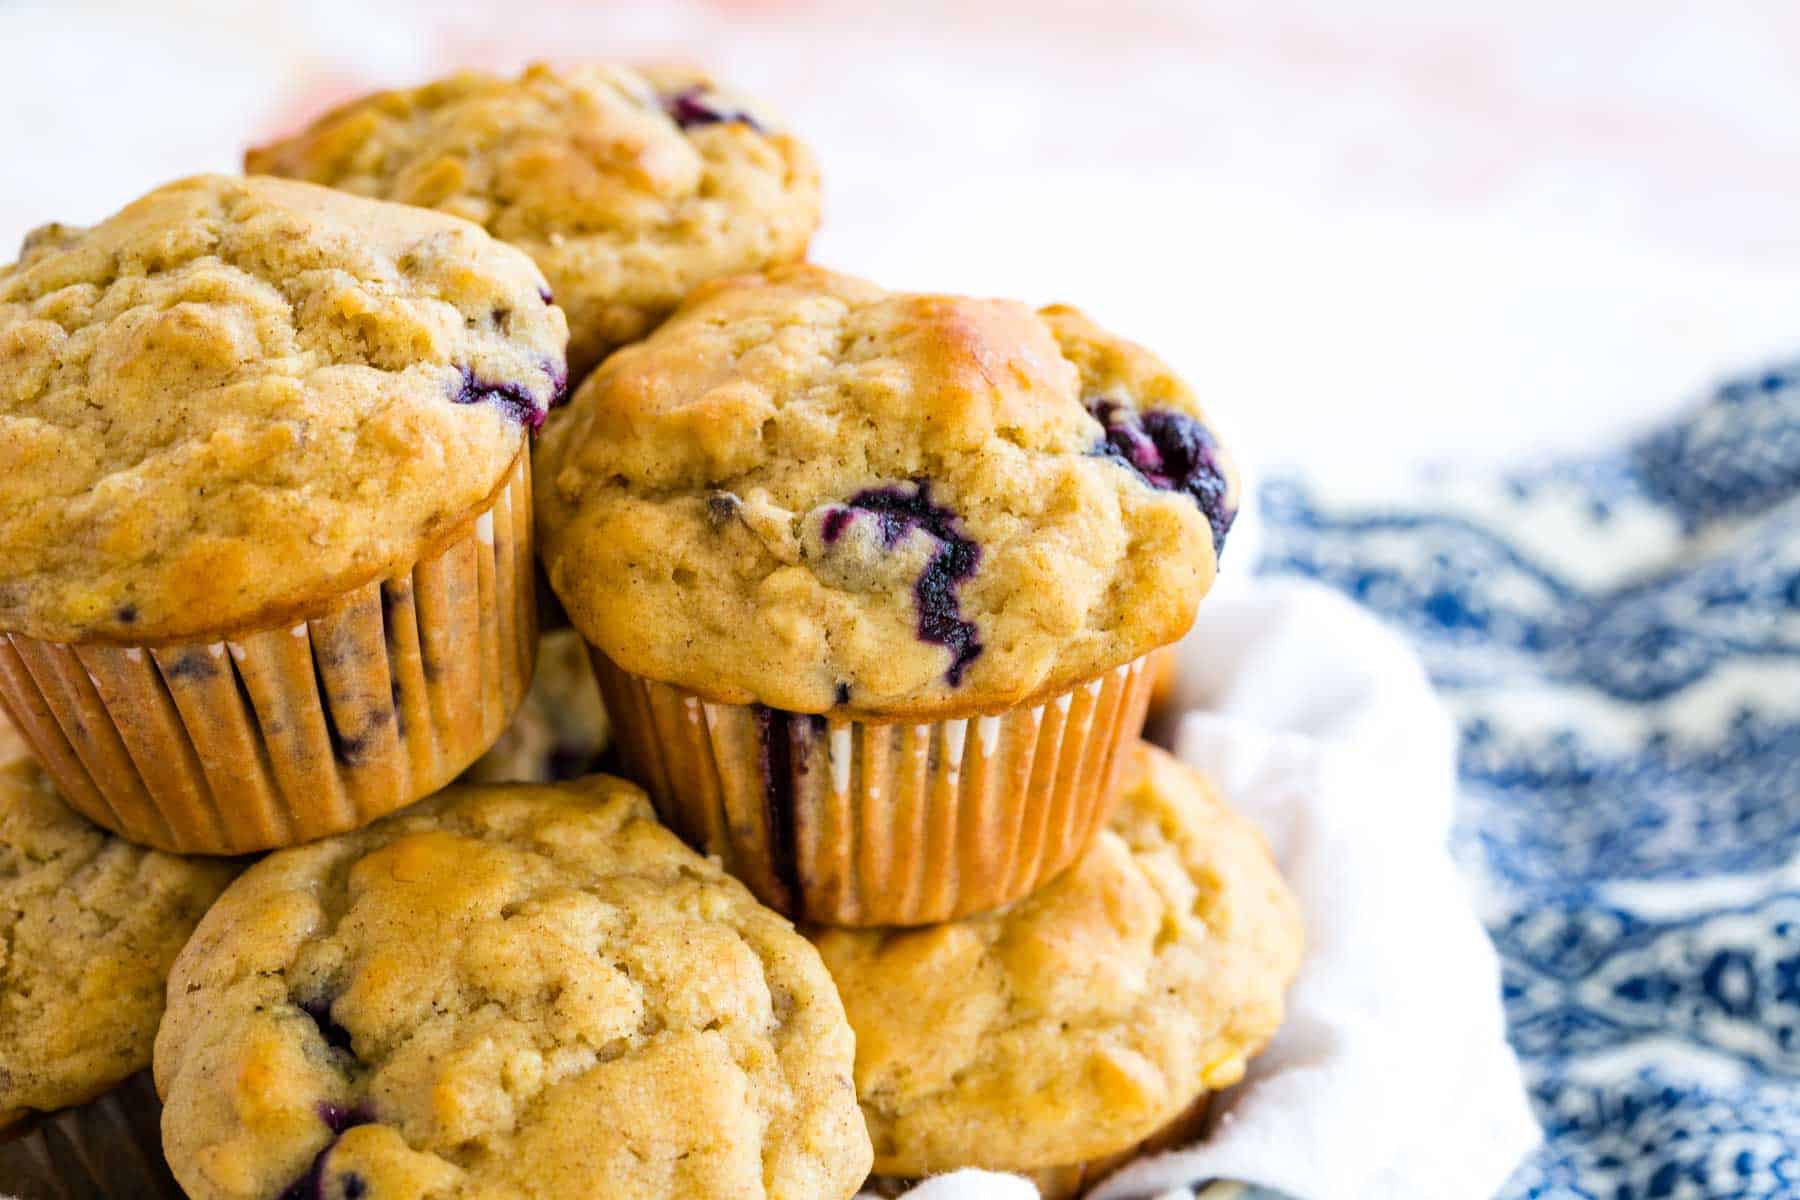 Gluten-free muffins piled into a basket on top of a decorative placemat